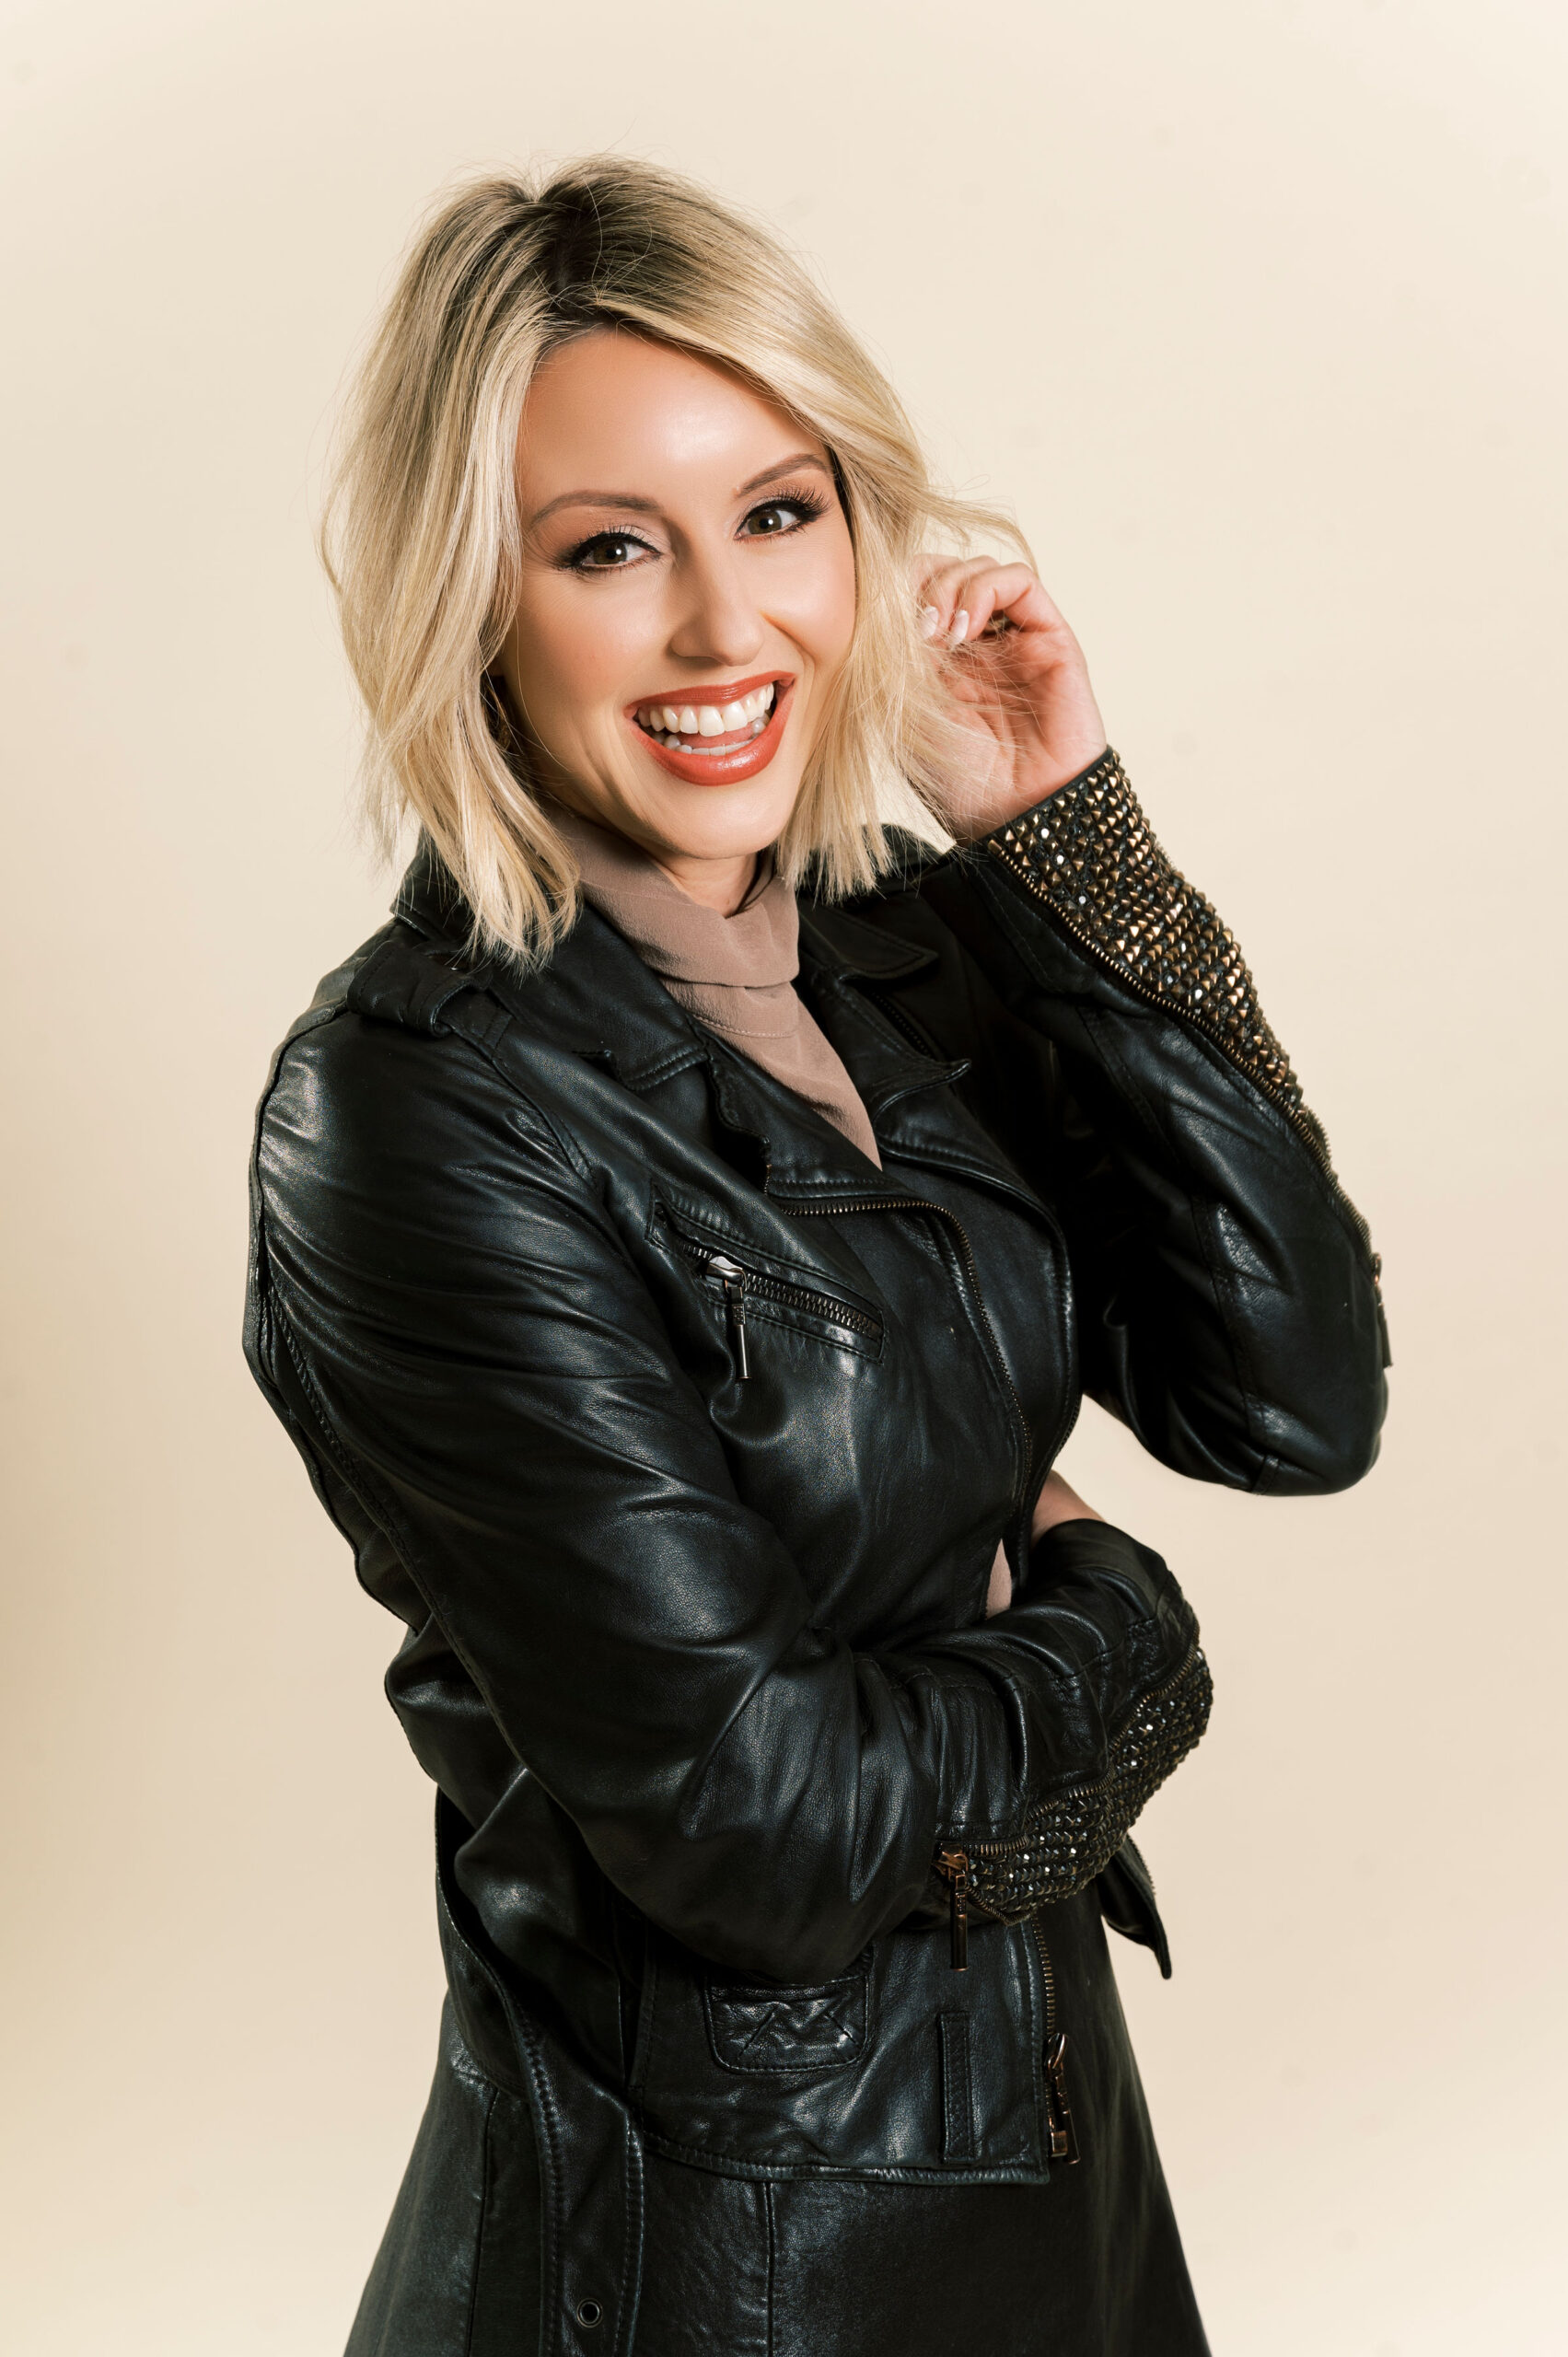 Anna Peters Talks Taking Risks & Career Growth - Bangstyle